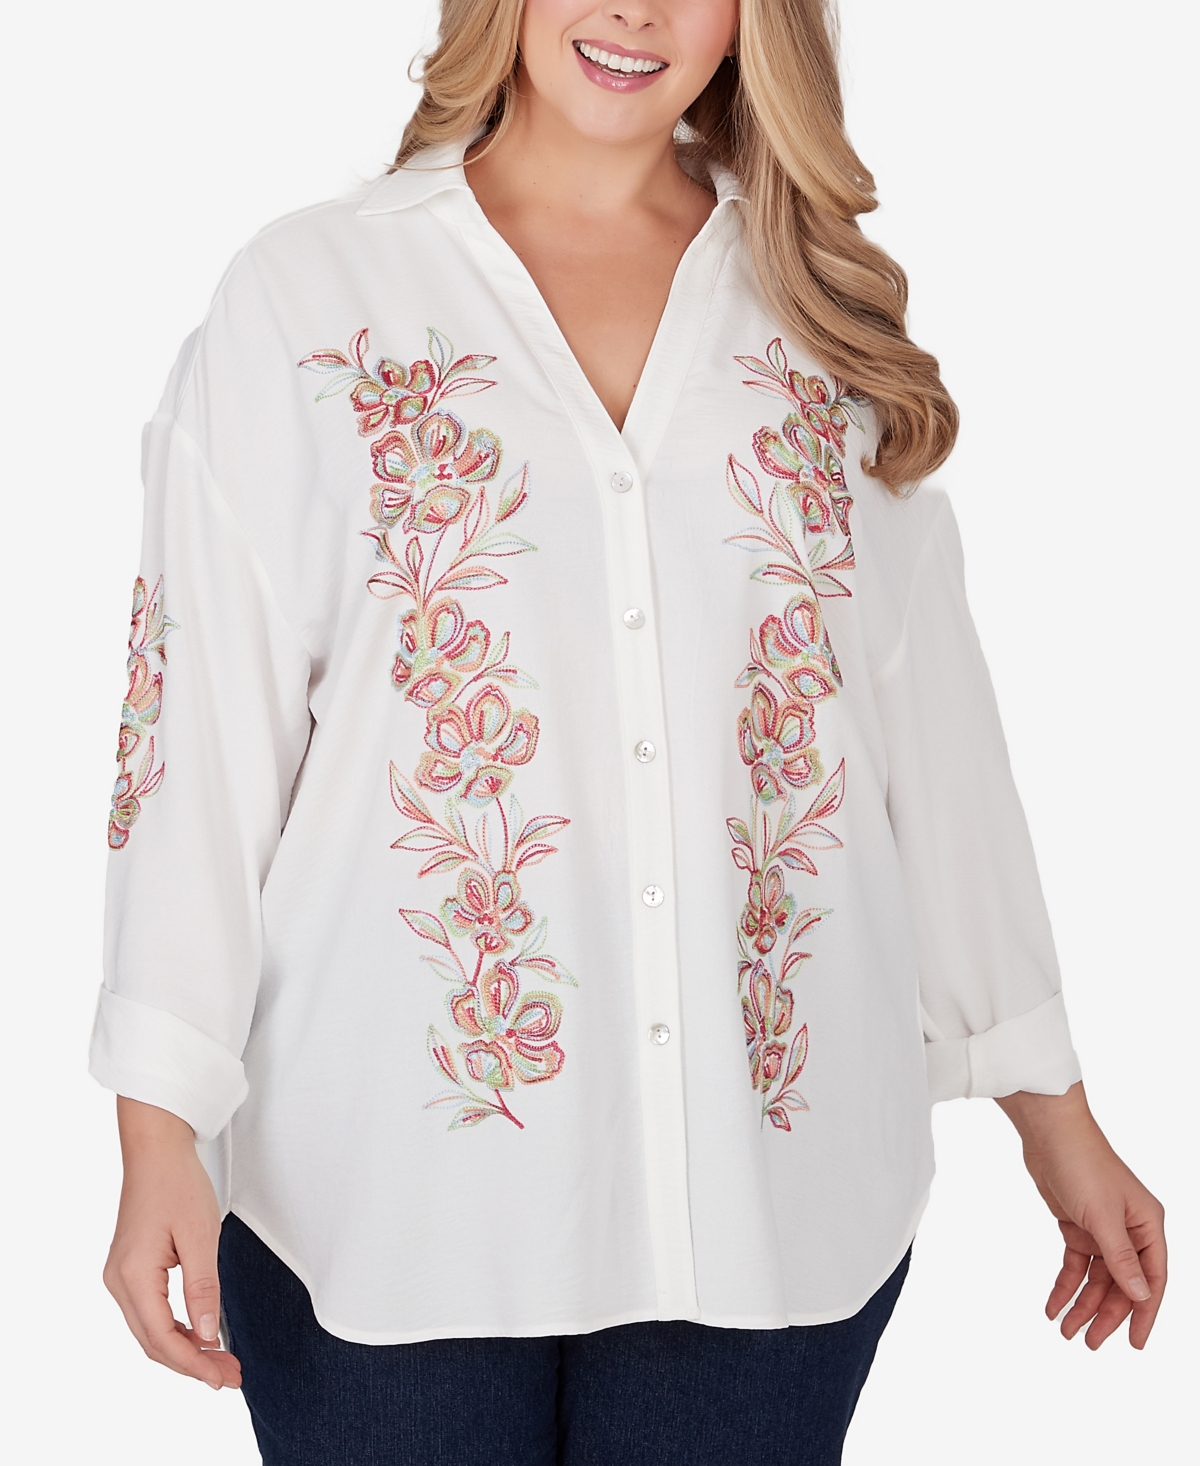 Plus Size Solid Embroidered Crepe Top - White